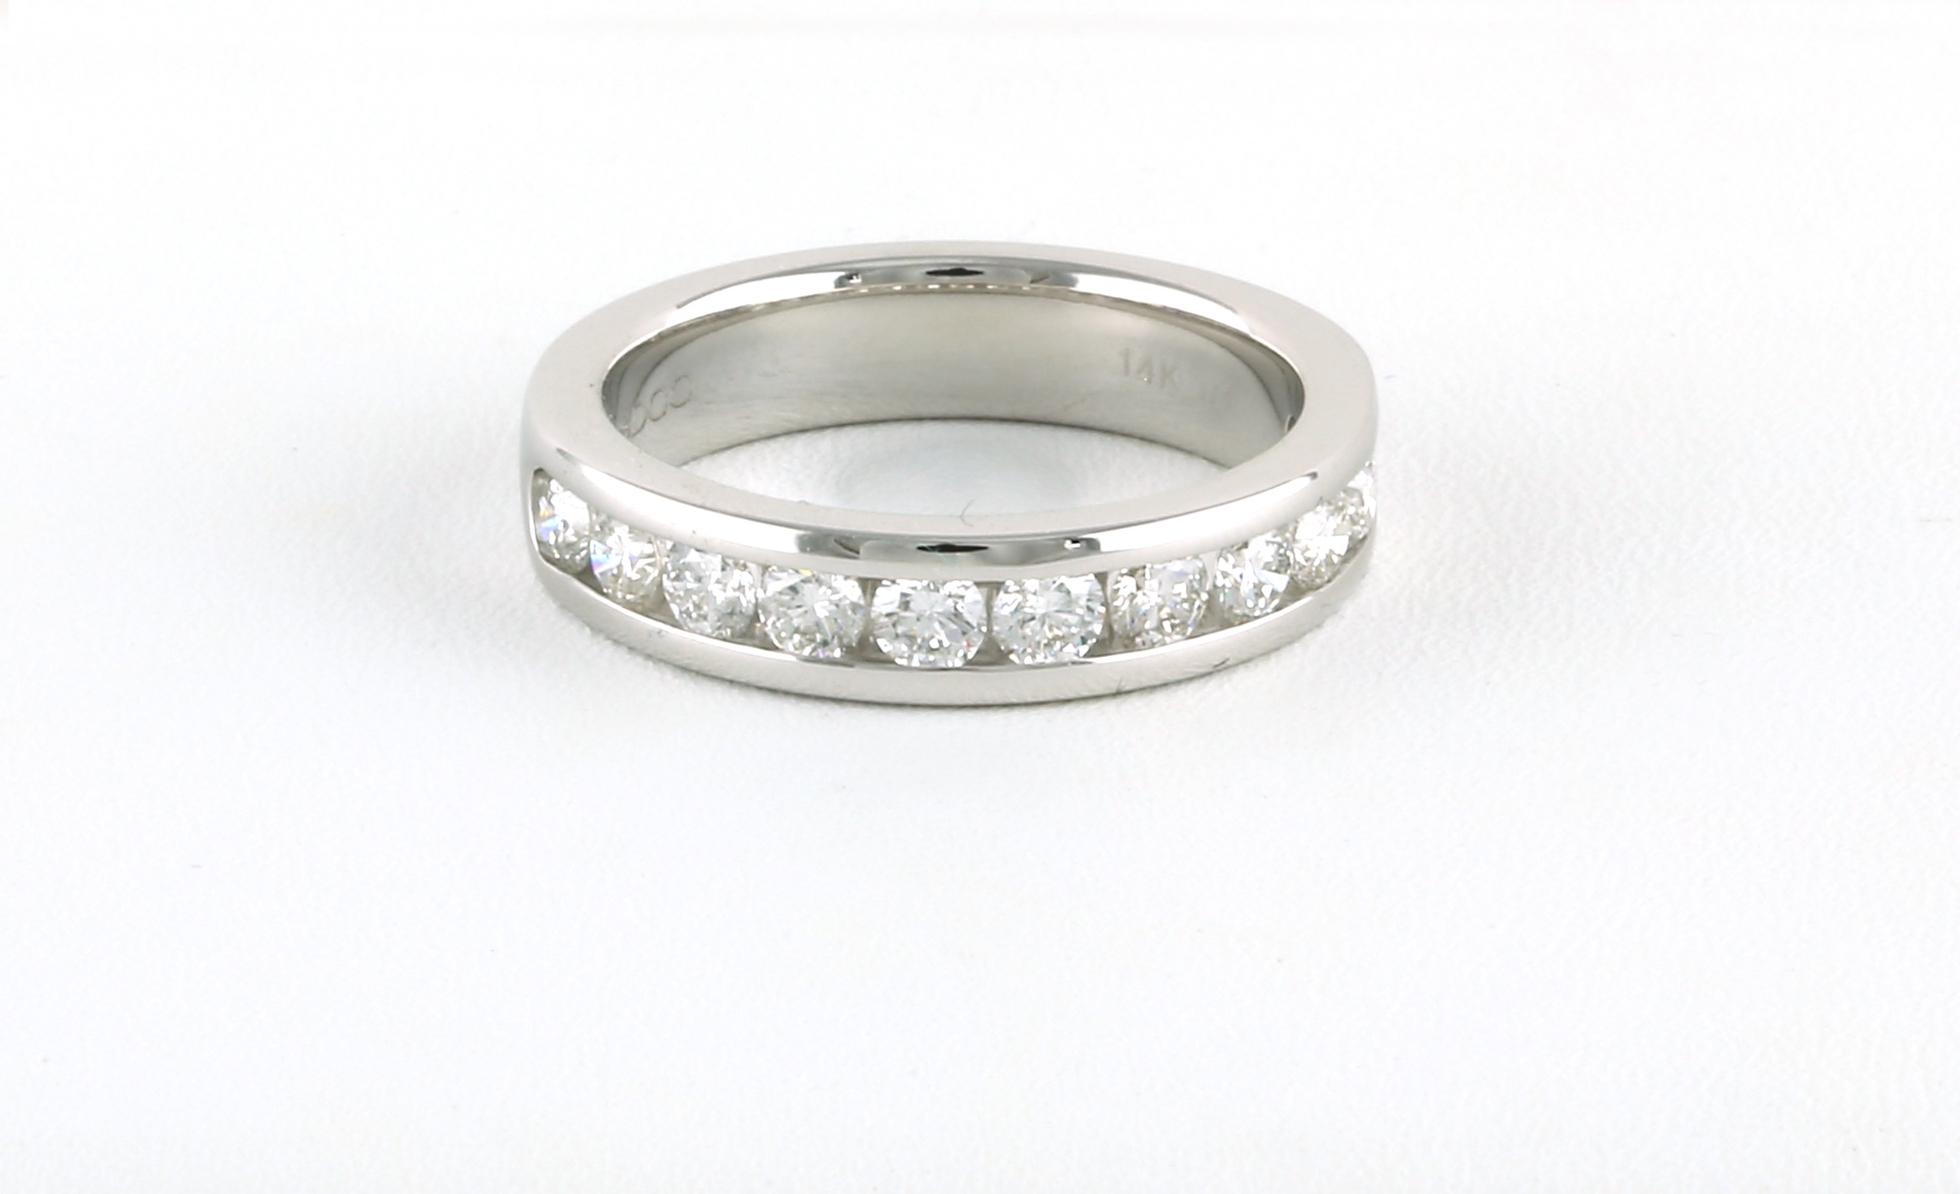 11-Stone Channel-set Diamond Wedding Band in White Gold (1.00cts TWT)